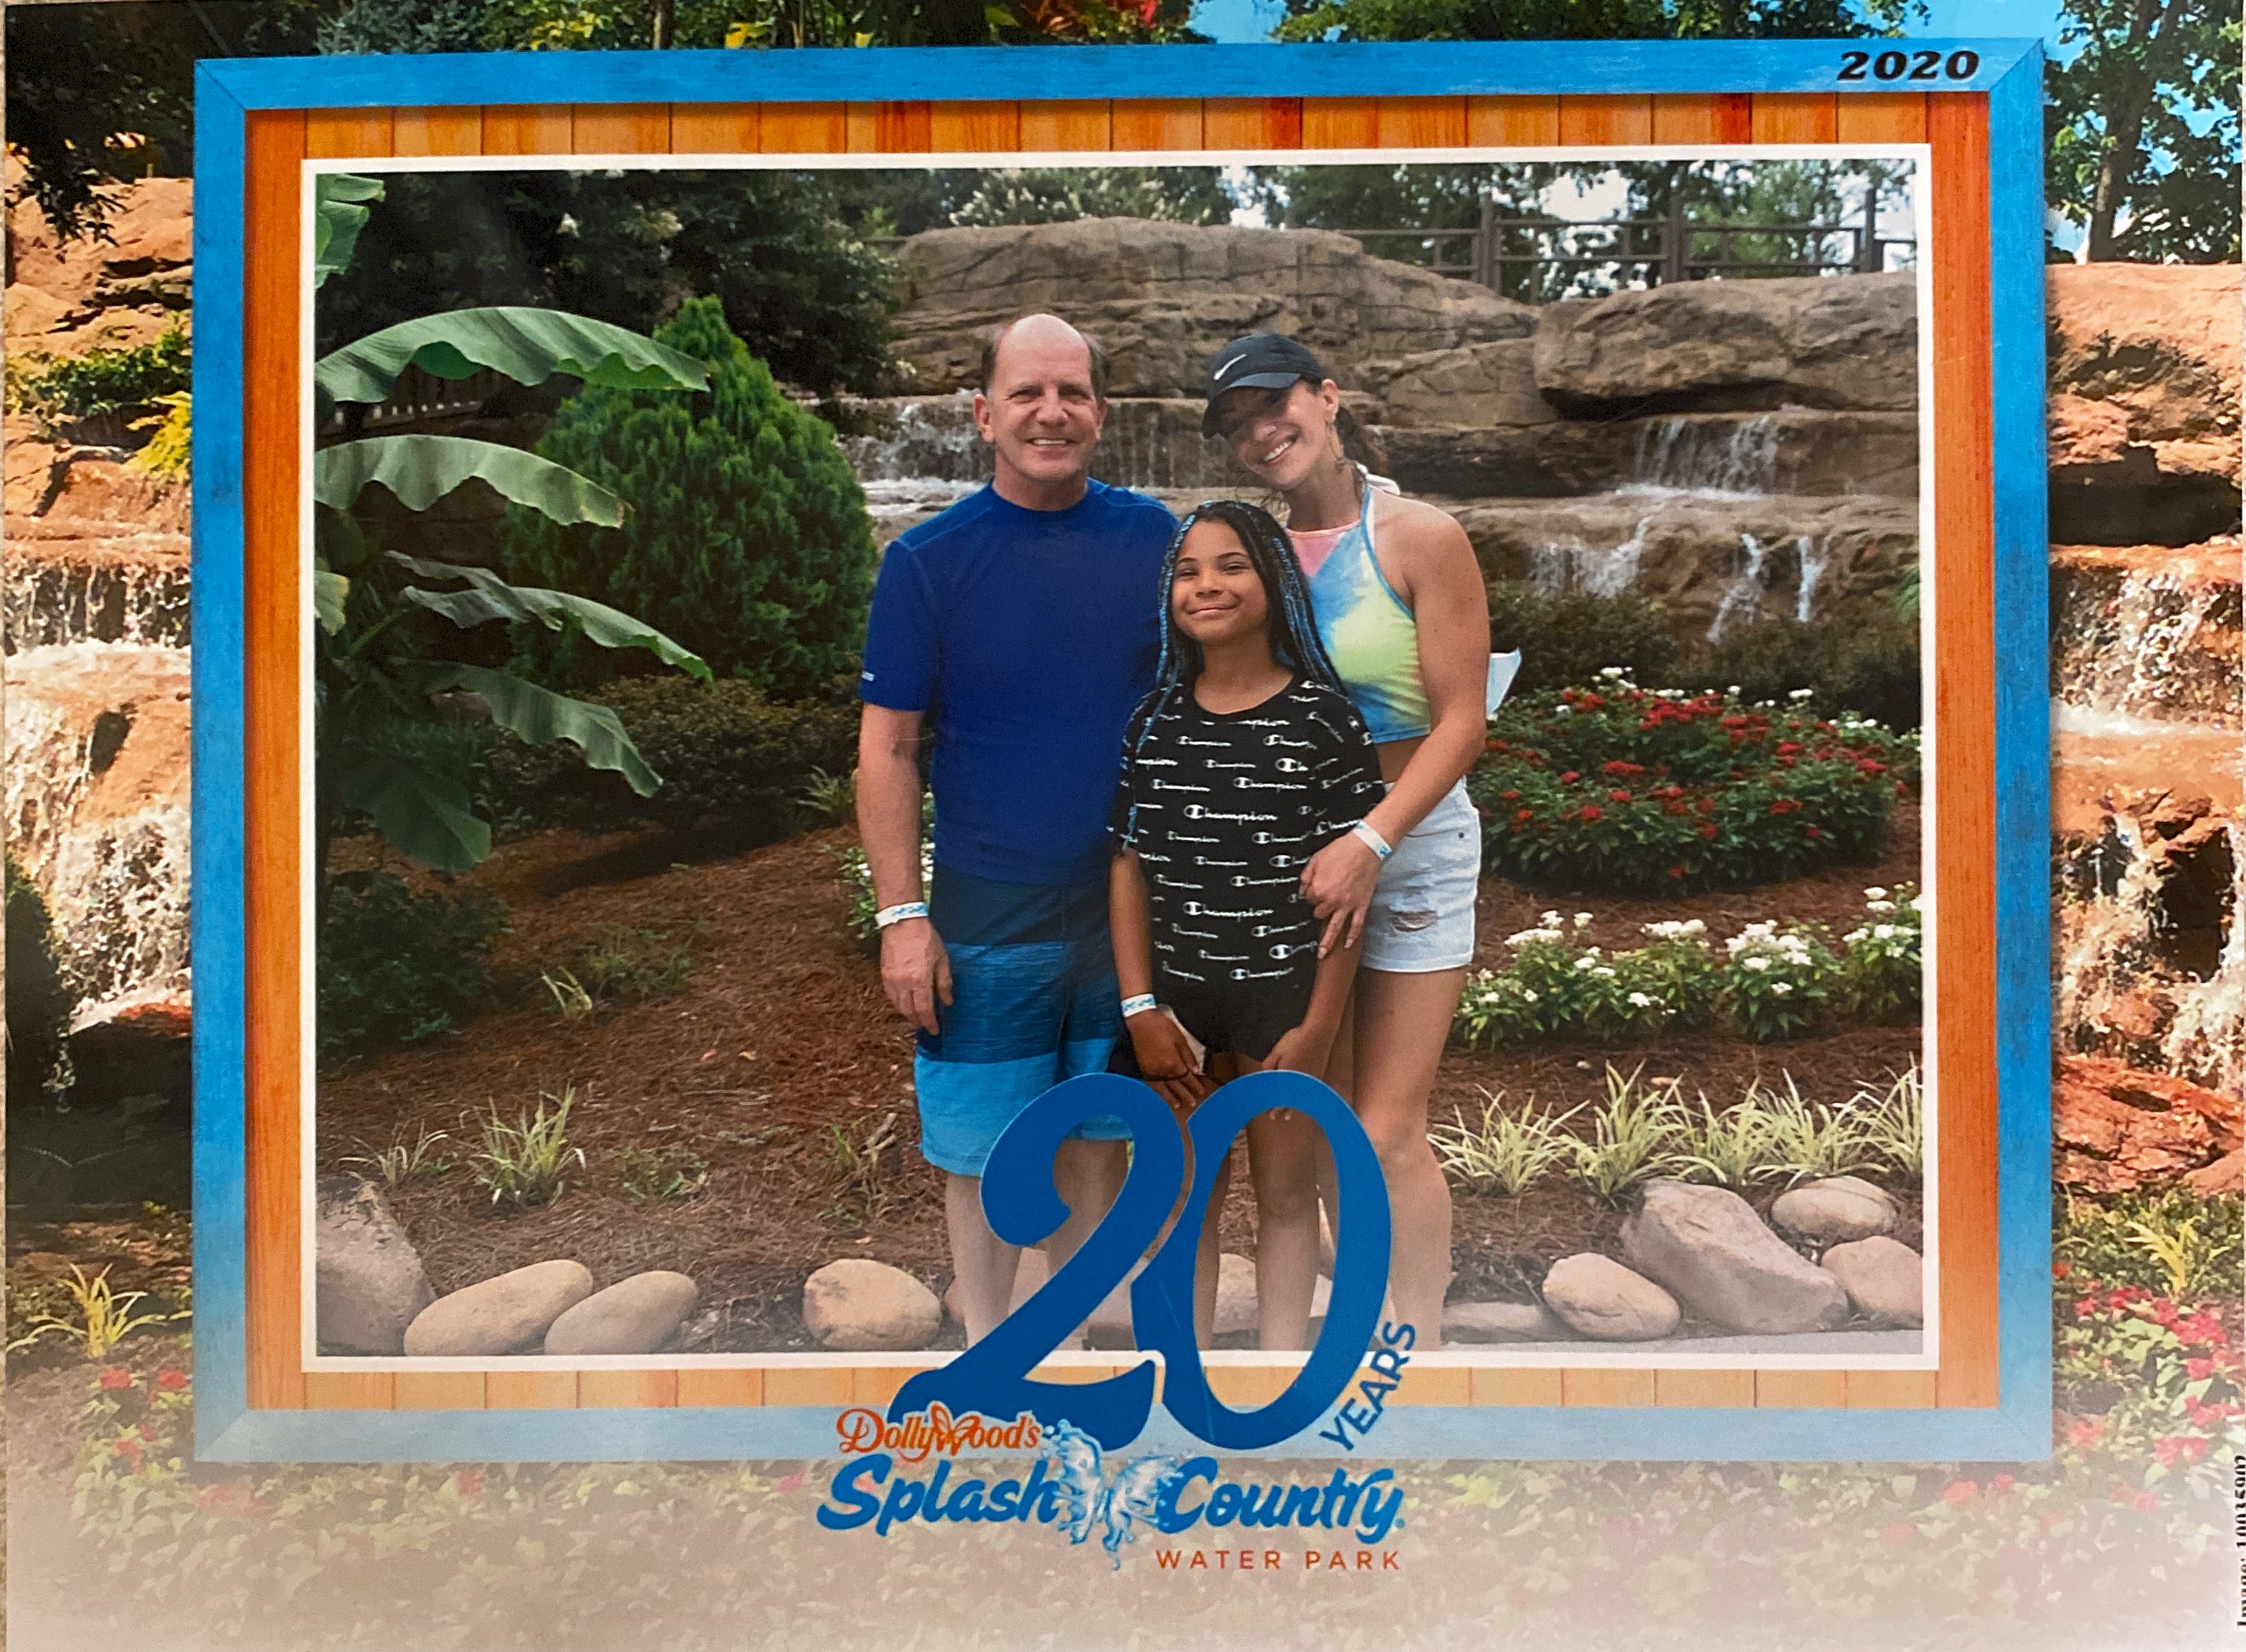 My first time in Tennessee and I was blessed to share this experience with my father, Steve and daughter, Maliyah at Dollywood’s Splash Country Water Park. 2020 -Splash Country WATER PARK